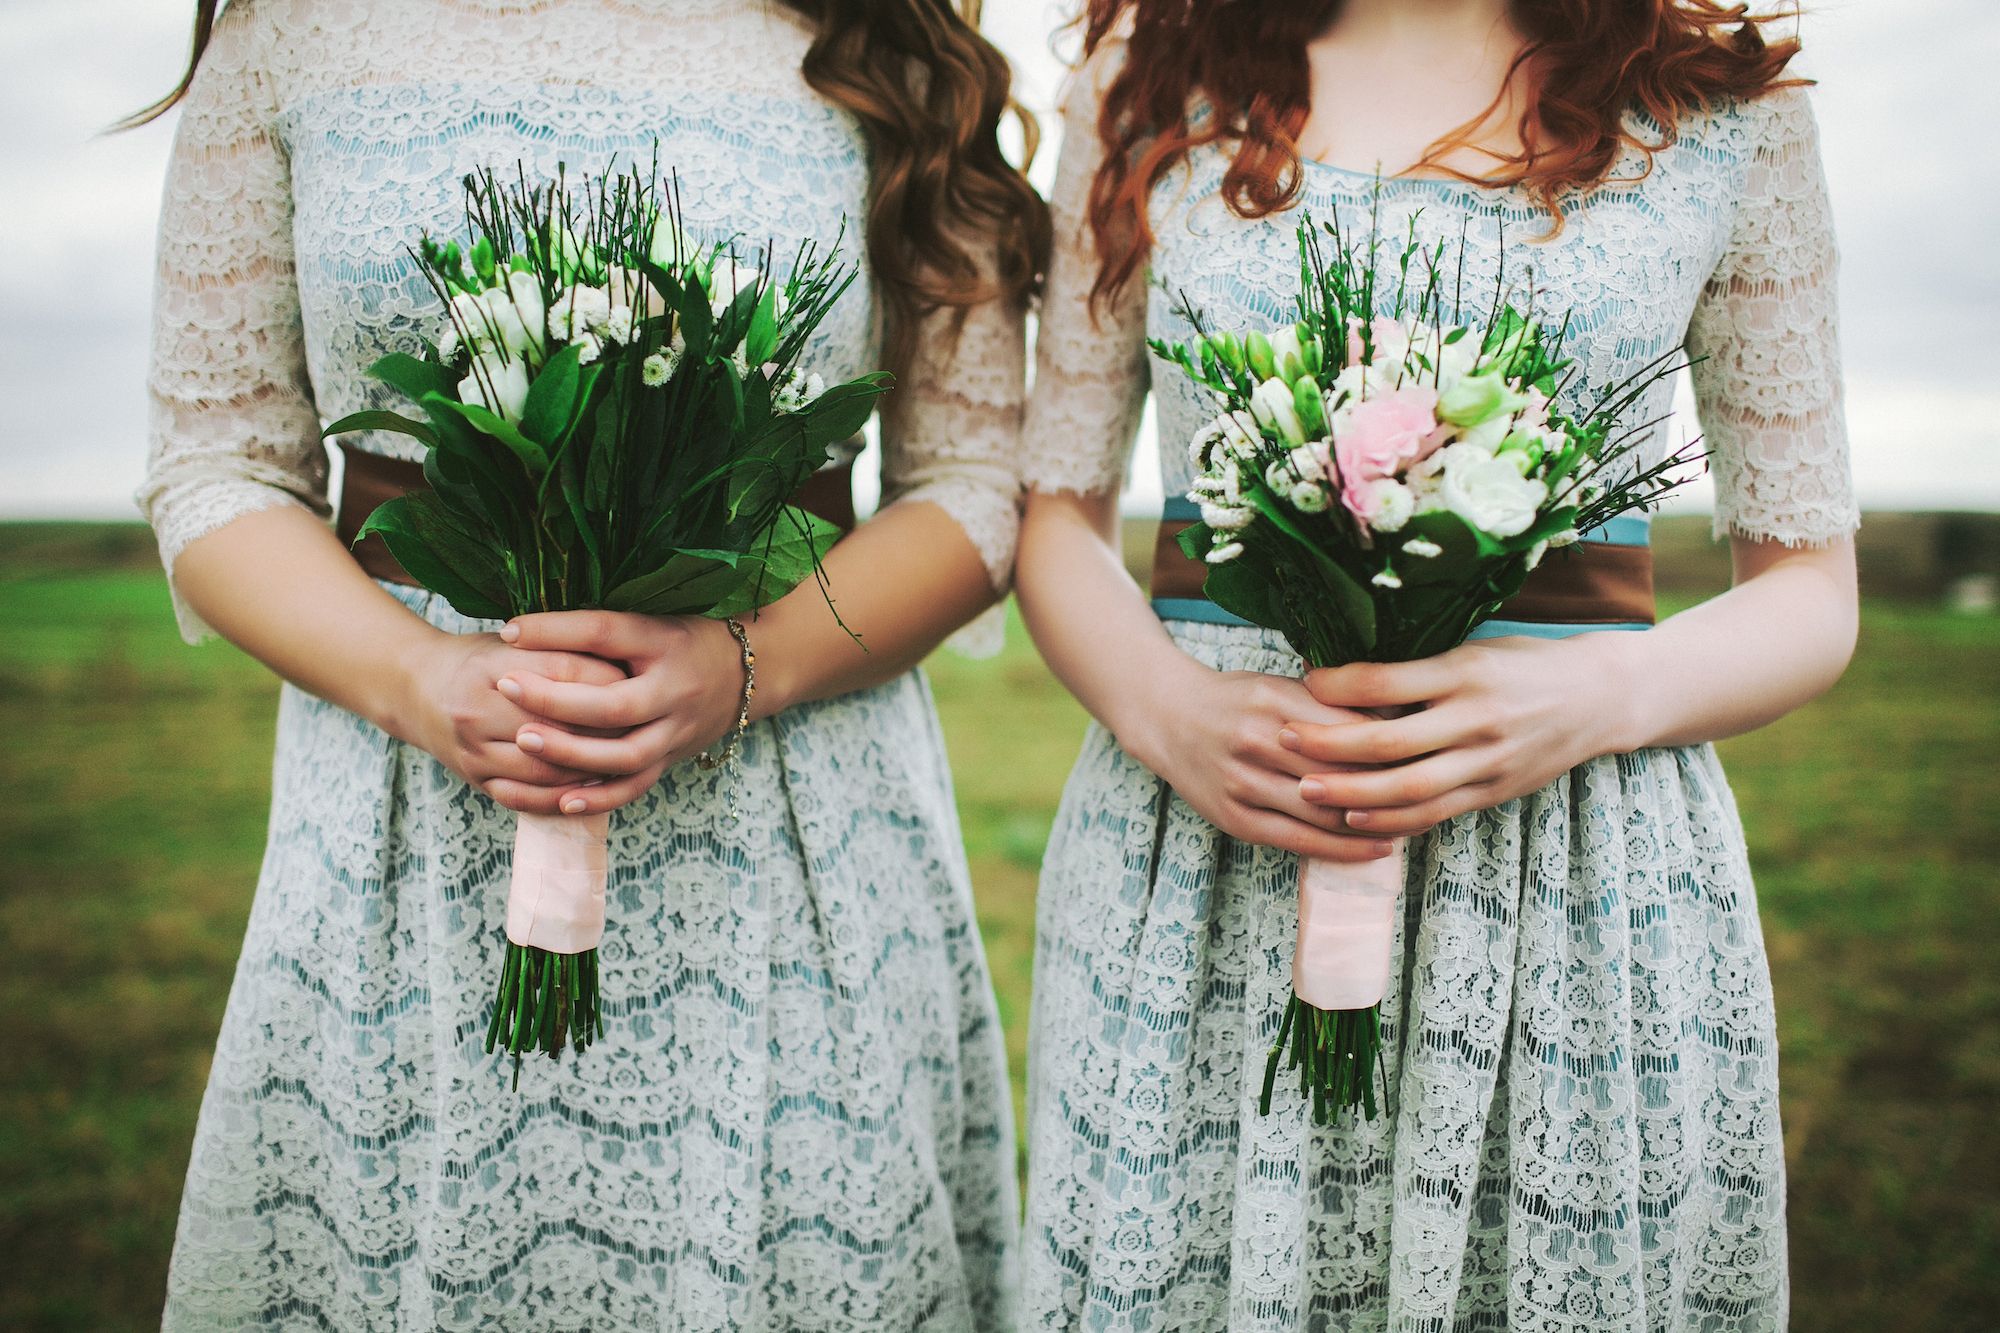 Bridesmaid Takes Legal Action Against Bride After Being Kicked Off The Wedding